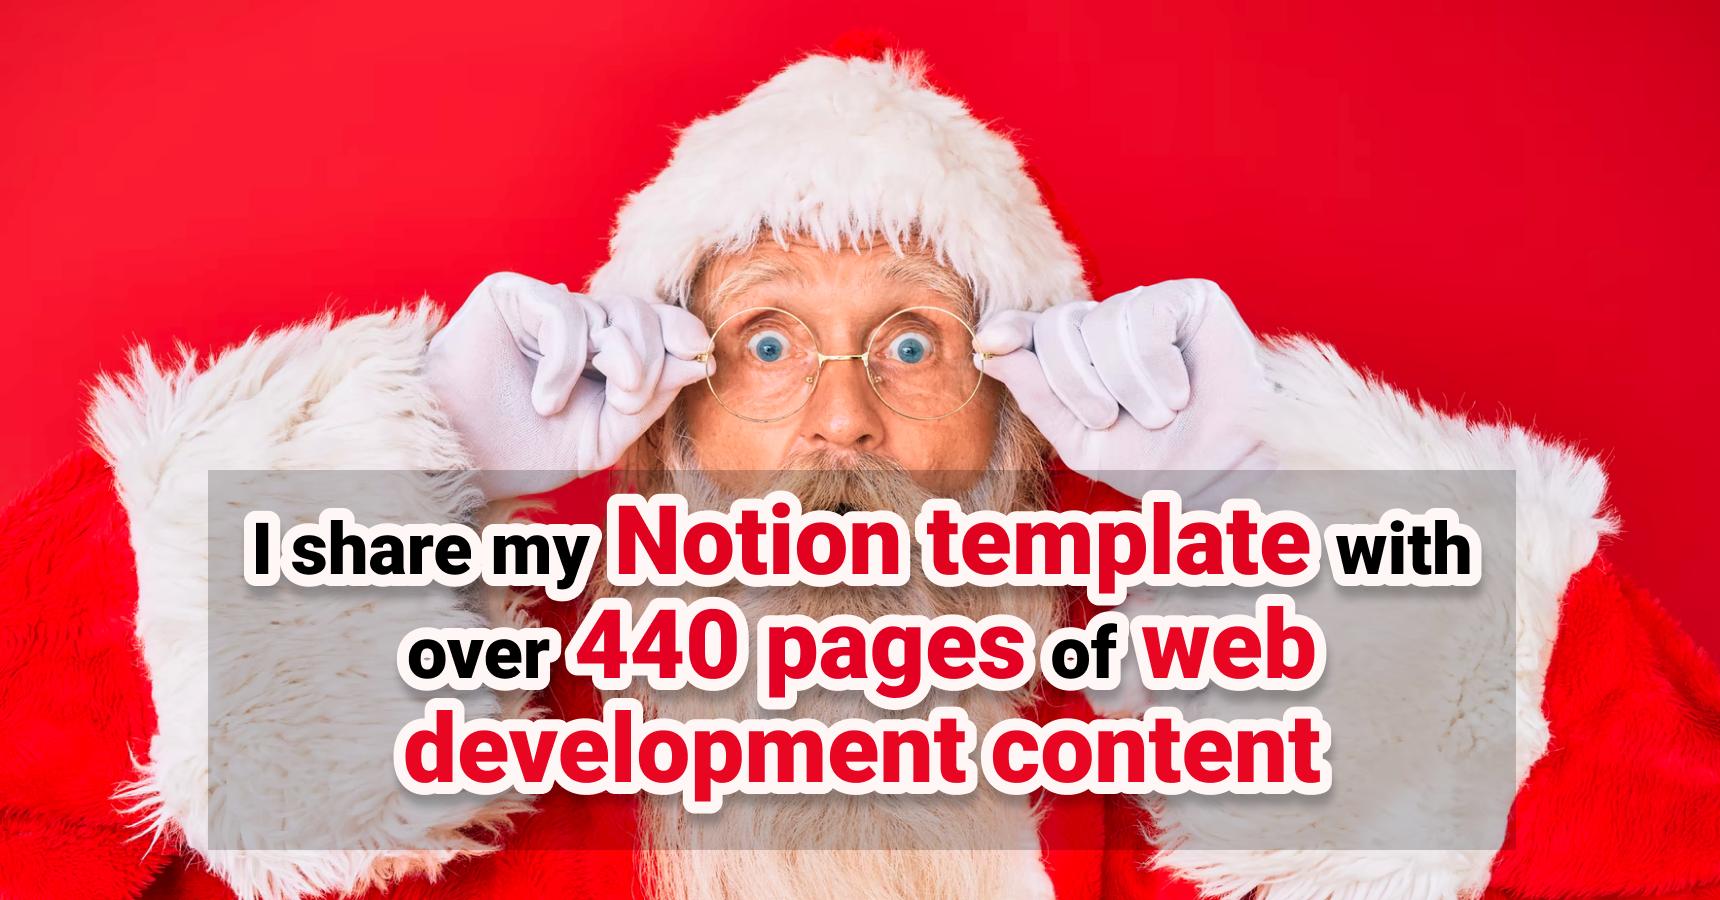 I share my Notion template with over 440 pages of web development content